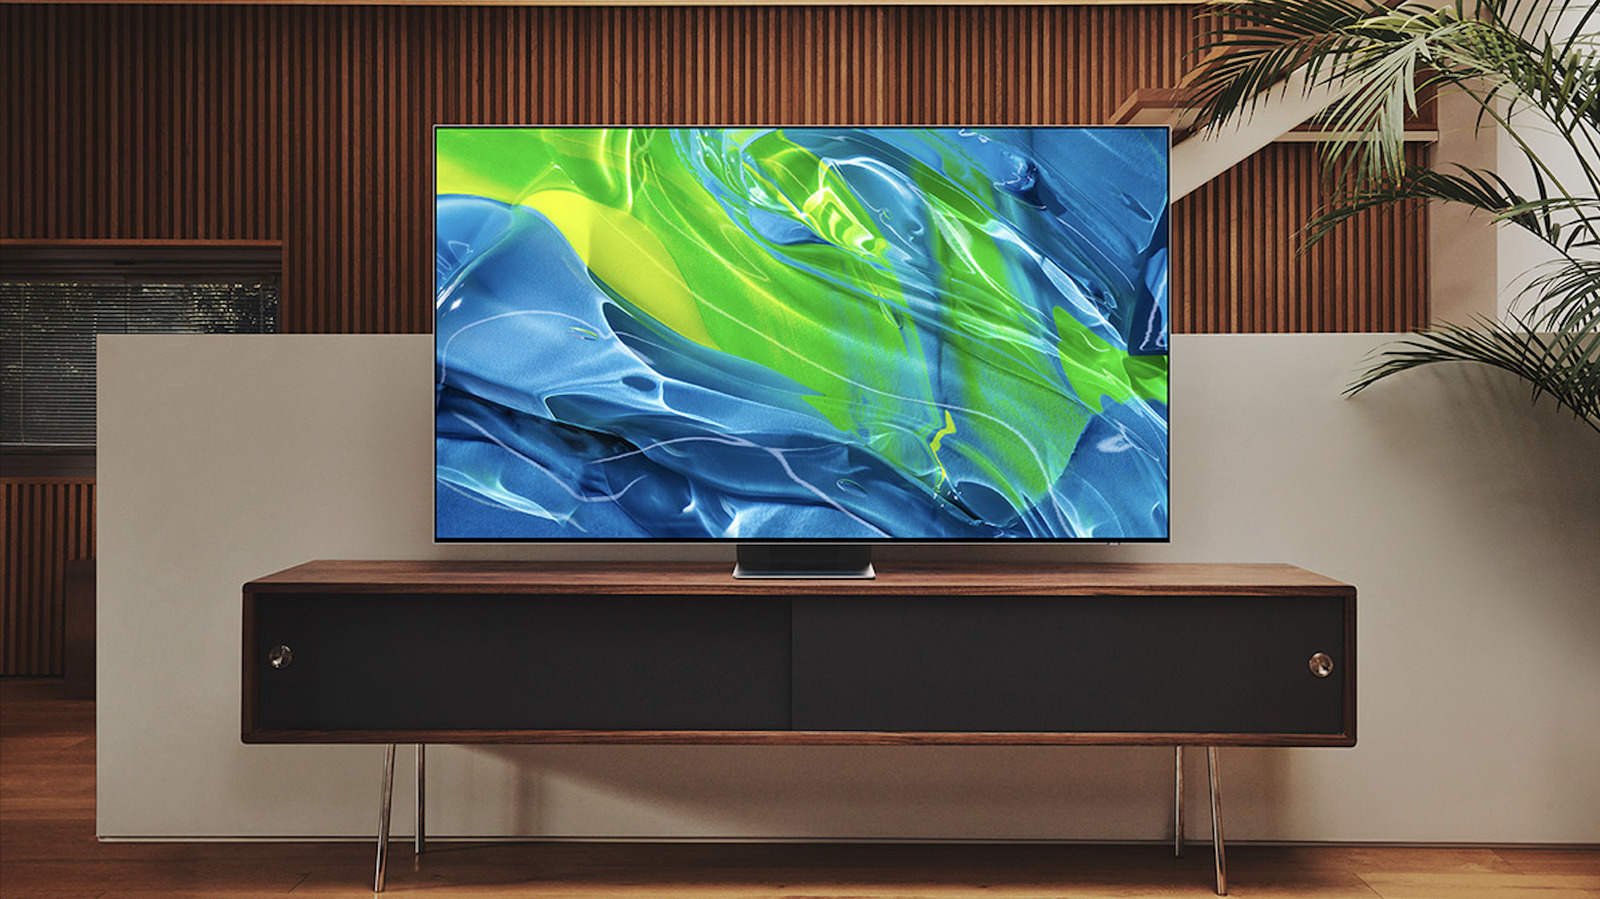 Samsung Is Giving Away Free 65-Inch TVs: Here's The Catch